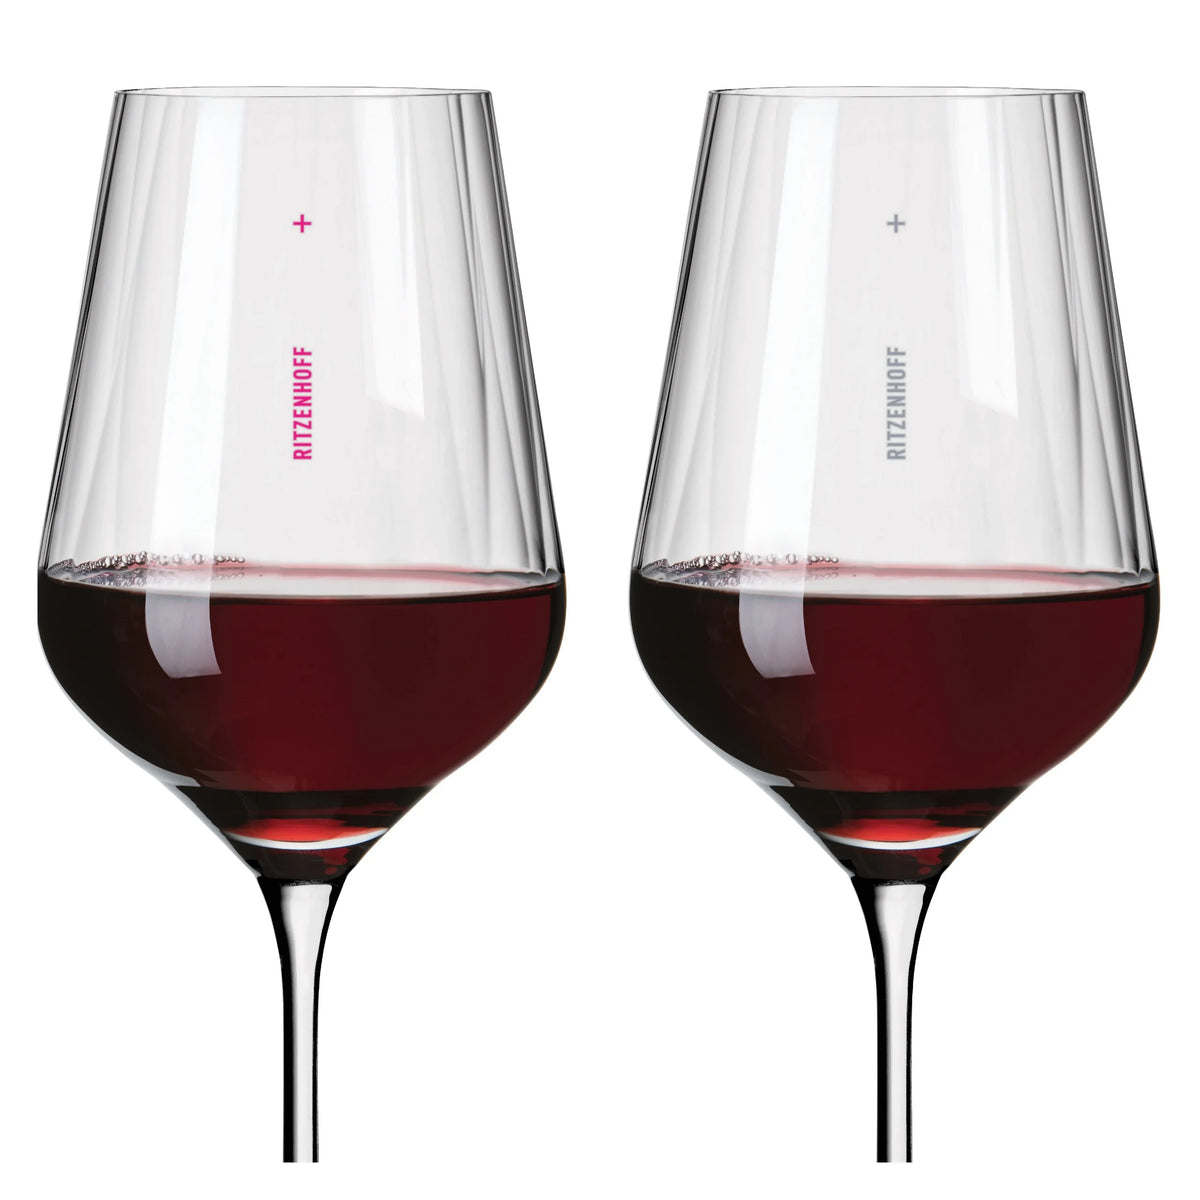 2 x Ritzenhoff &#39;Sternschliff&#39; Red Wine Glasses. Precision manufacturing &amp; detail: these glasses are elaborately worked with an internal relief structure.